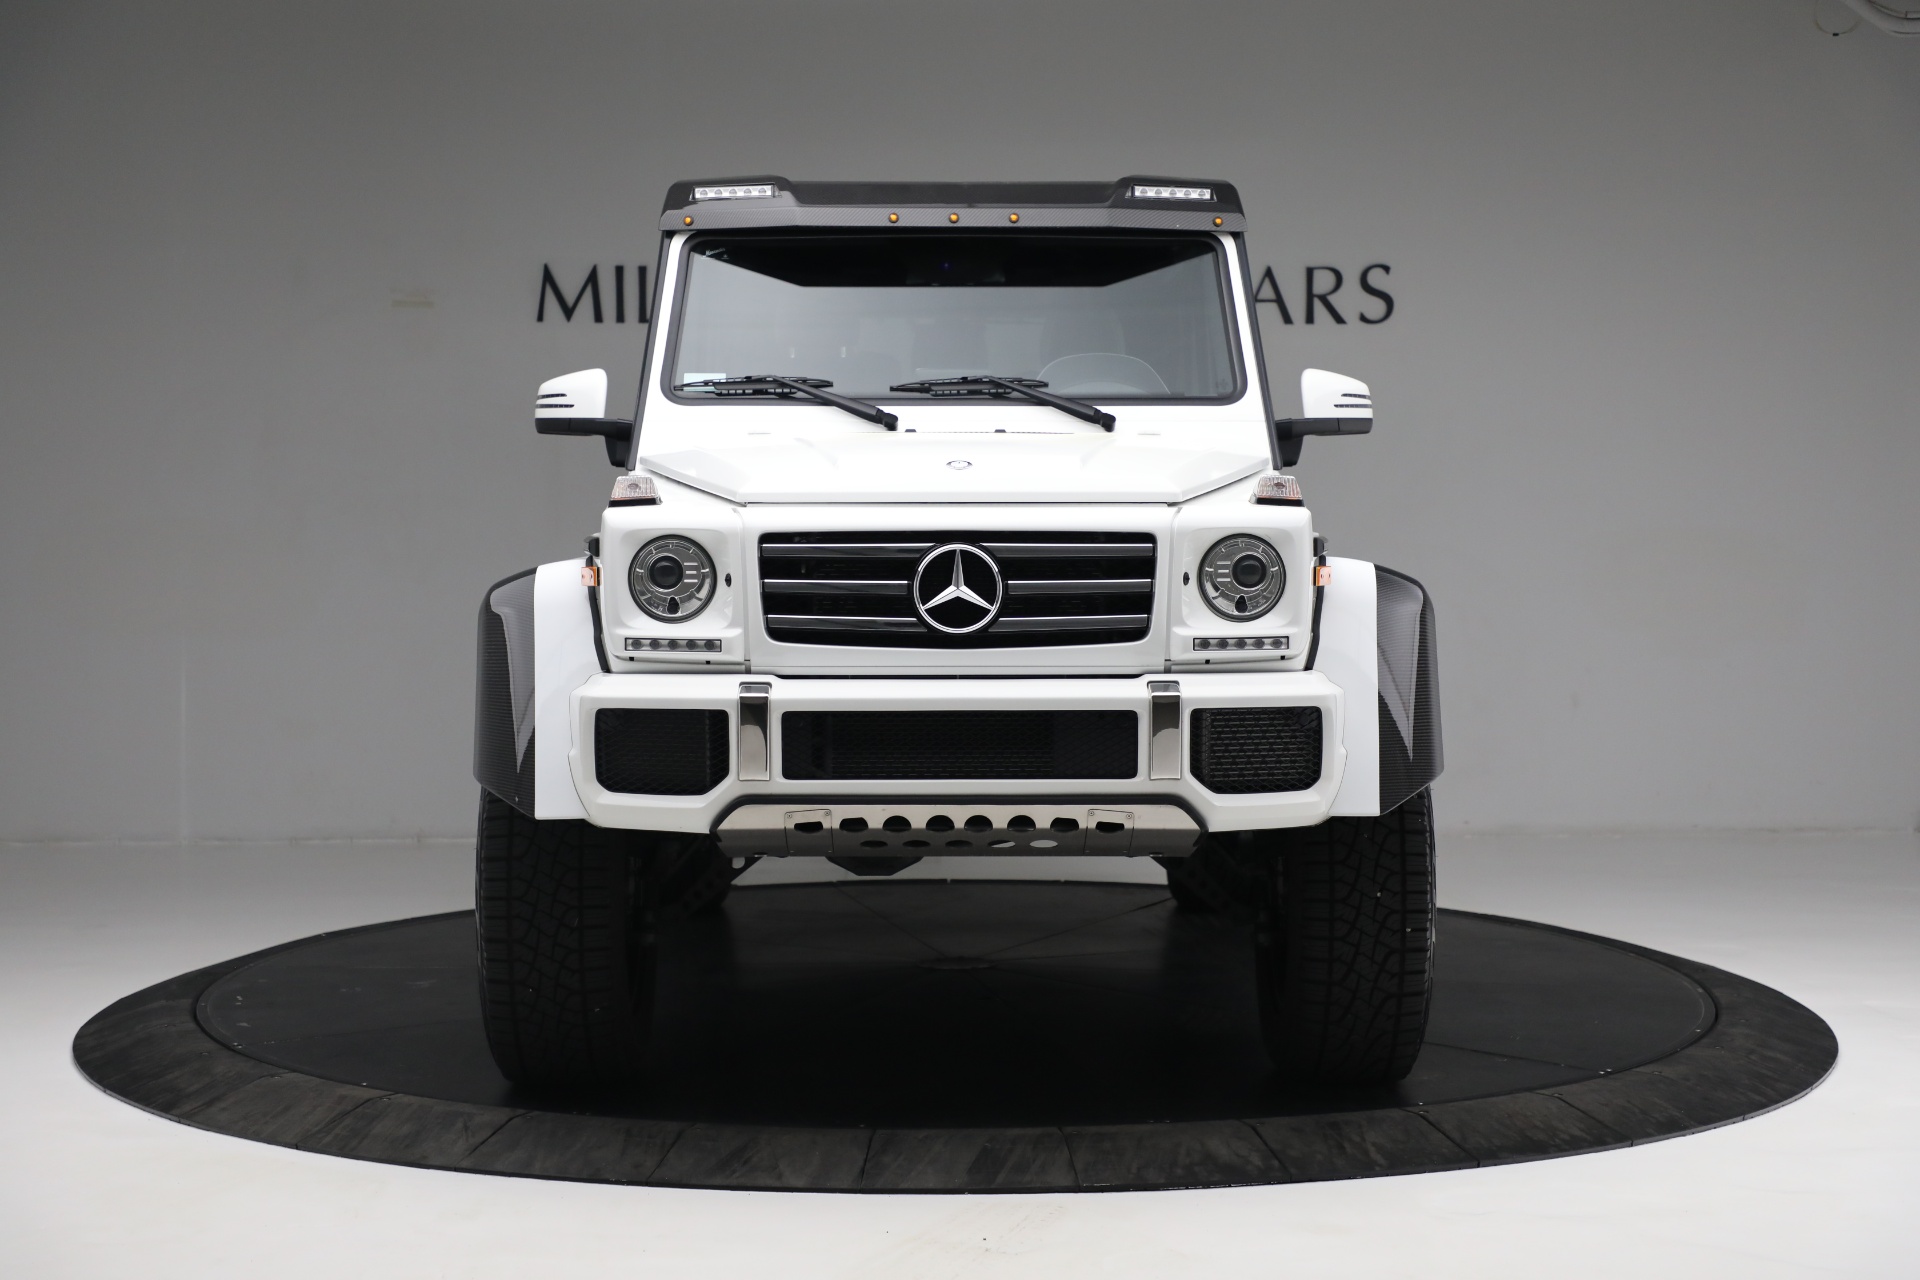 Used 2017 Mercedes Benz G Class G 550 4x4 Squared